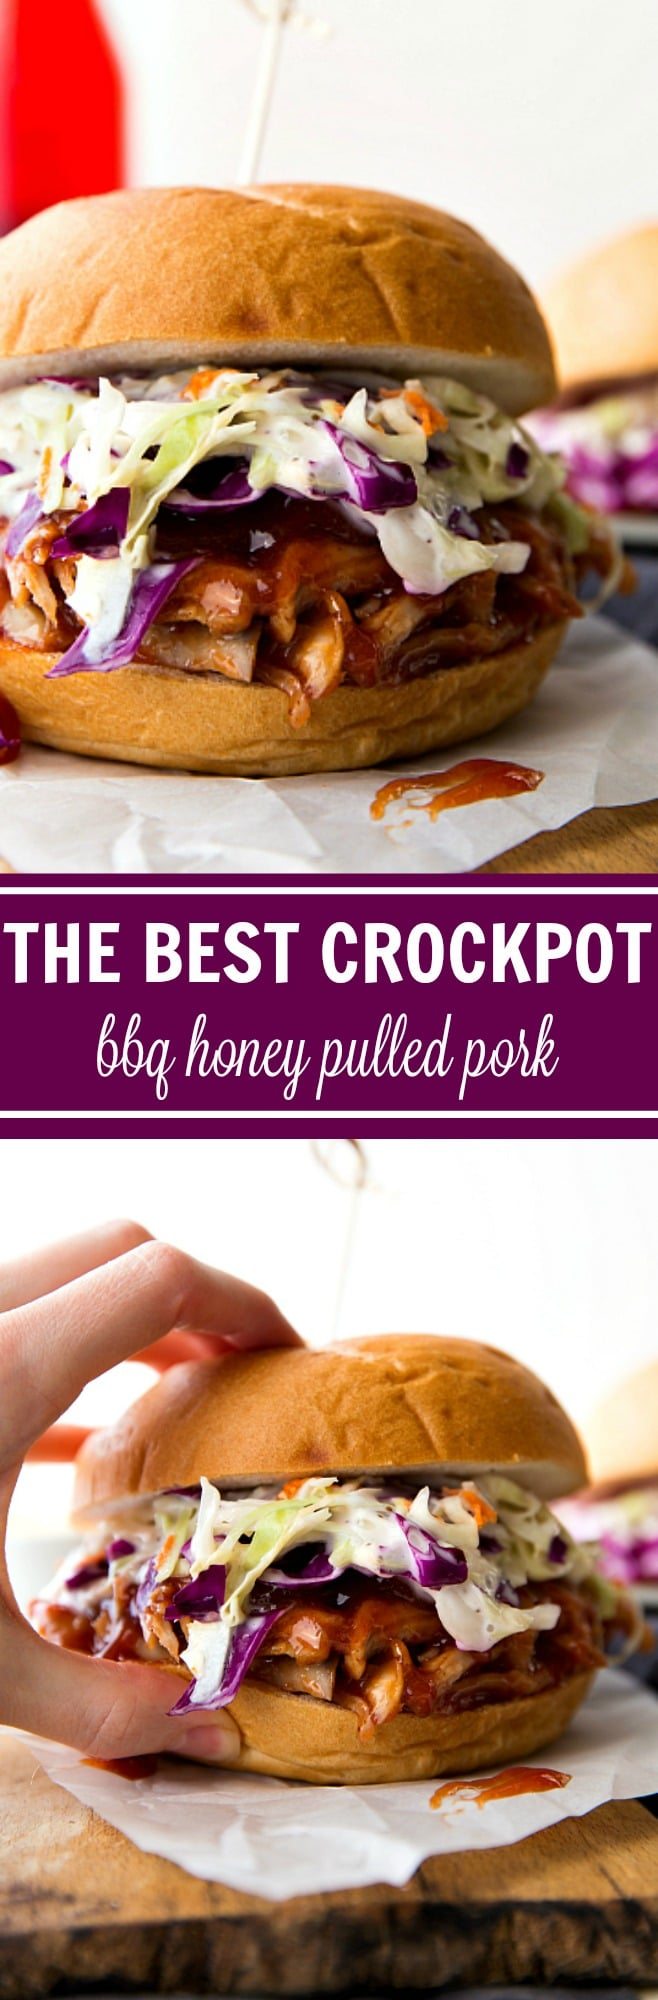 The absolute BEST honey BBQ pulled pork sandwiches made simple in the CROCKPOT! Recipe via chelseasmessyarpon.com